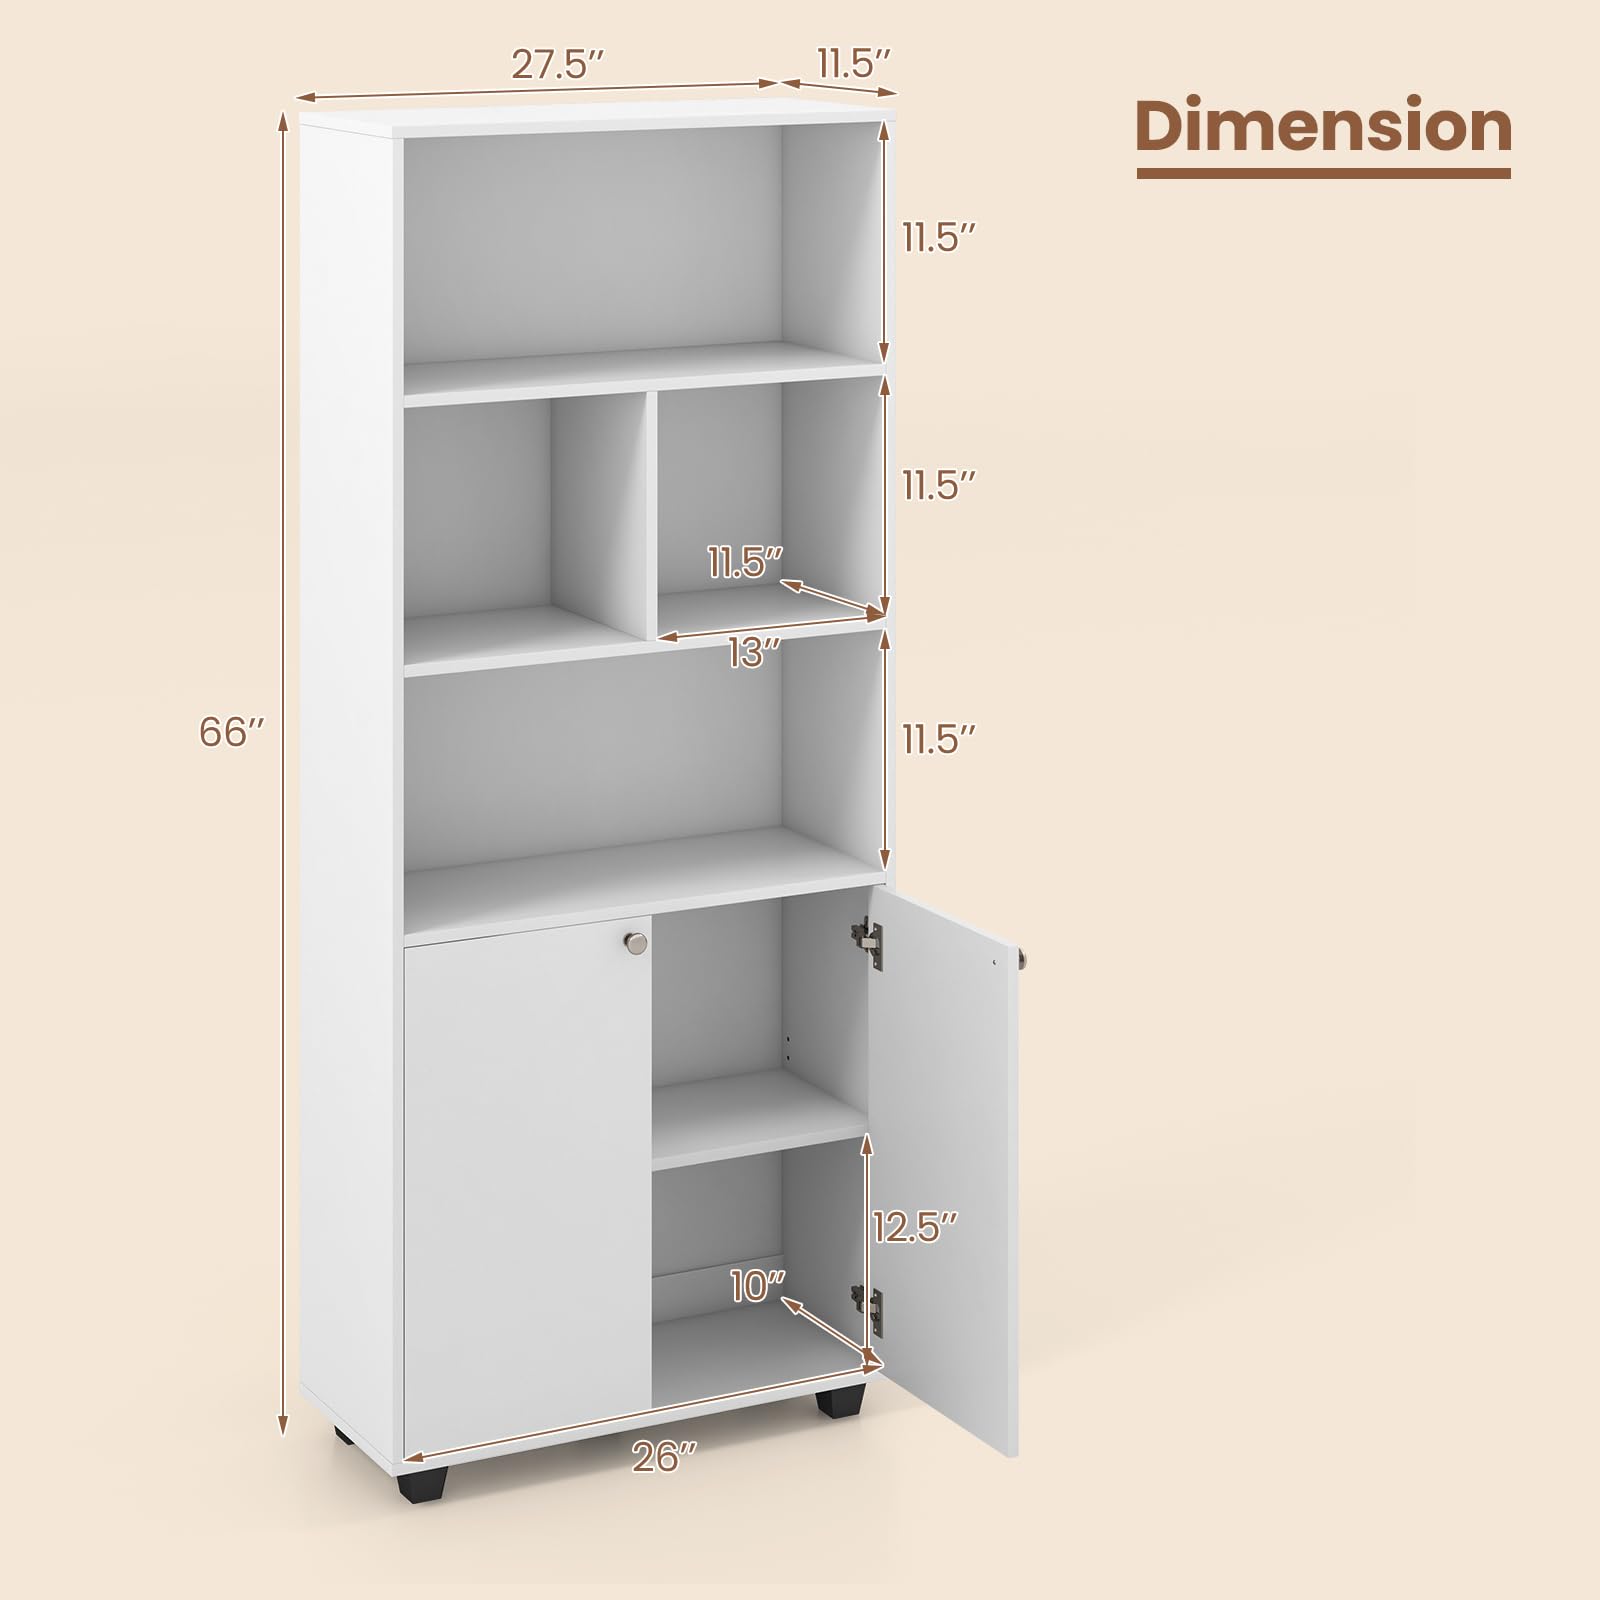 Giantex 66" Tall Bookcase with Doors, Wooden Bookshelf with Adjustable Shelf and 4 Storage Cubes